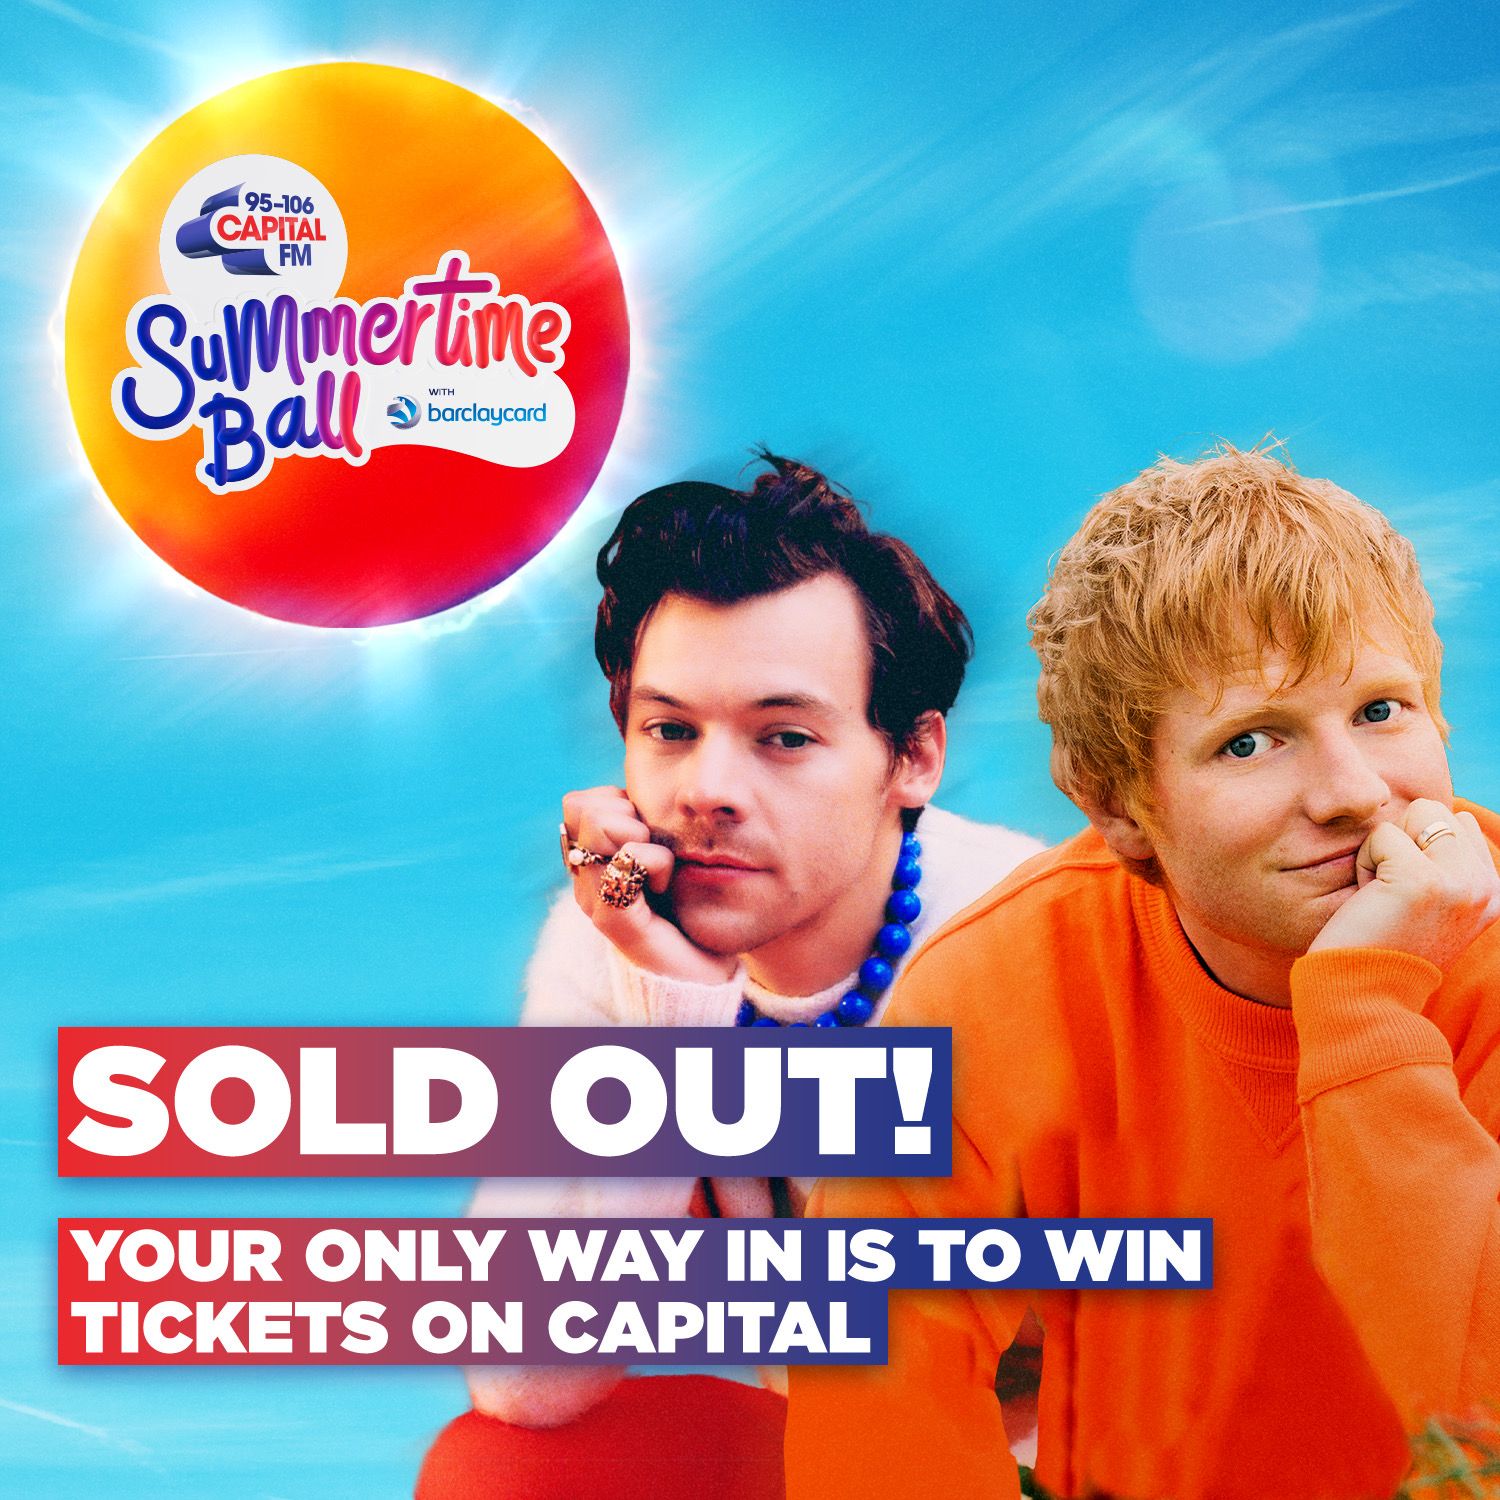 Capital’s Summertime Ball with Barclaycard sells out in under 24 hours